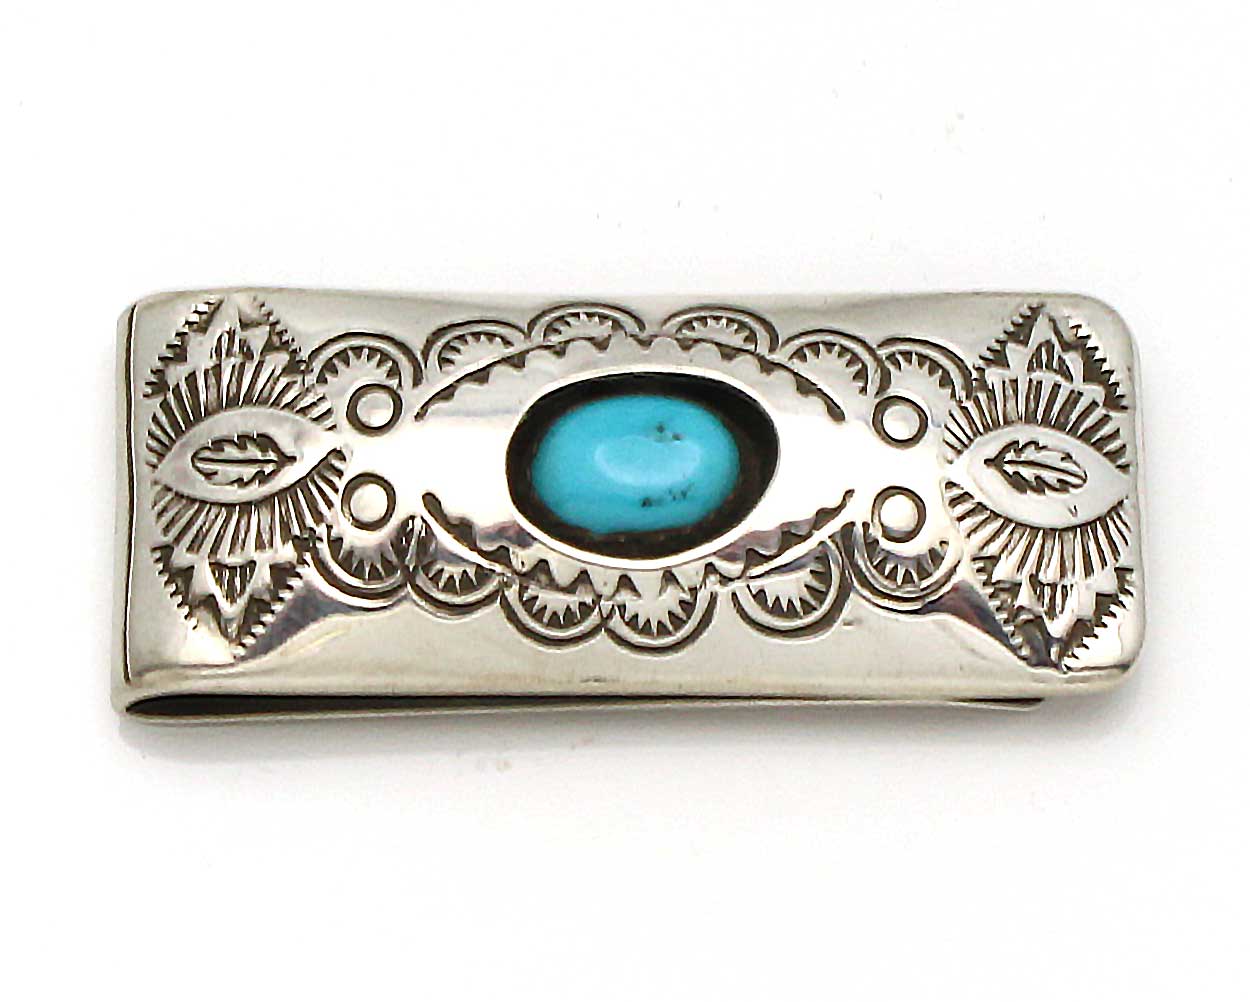 Stamped Turquoise Money Clip by Skeets